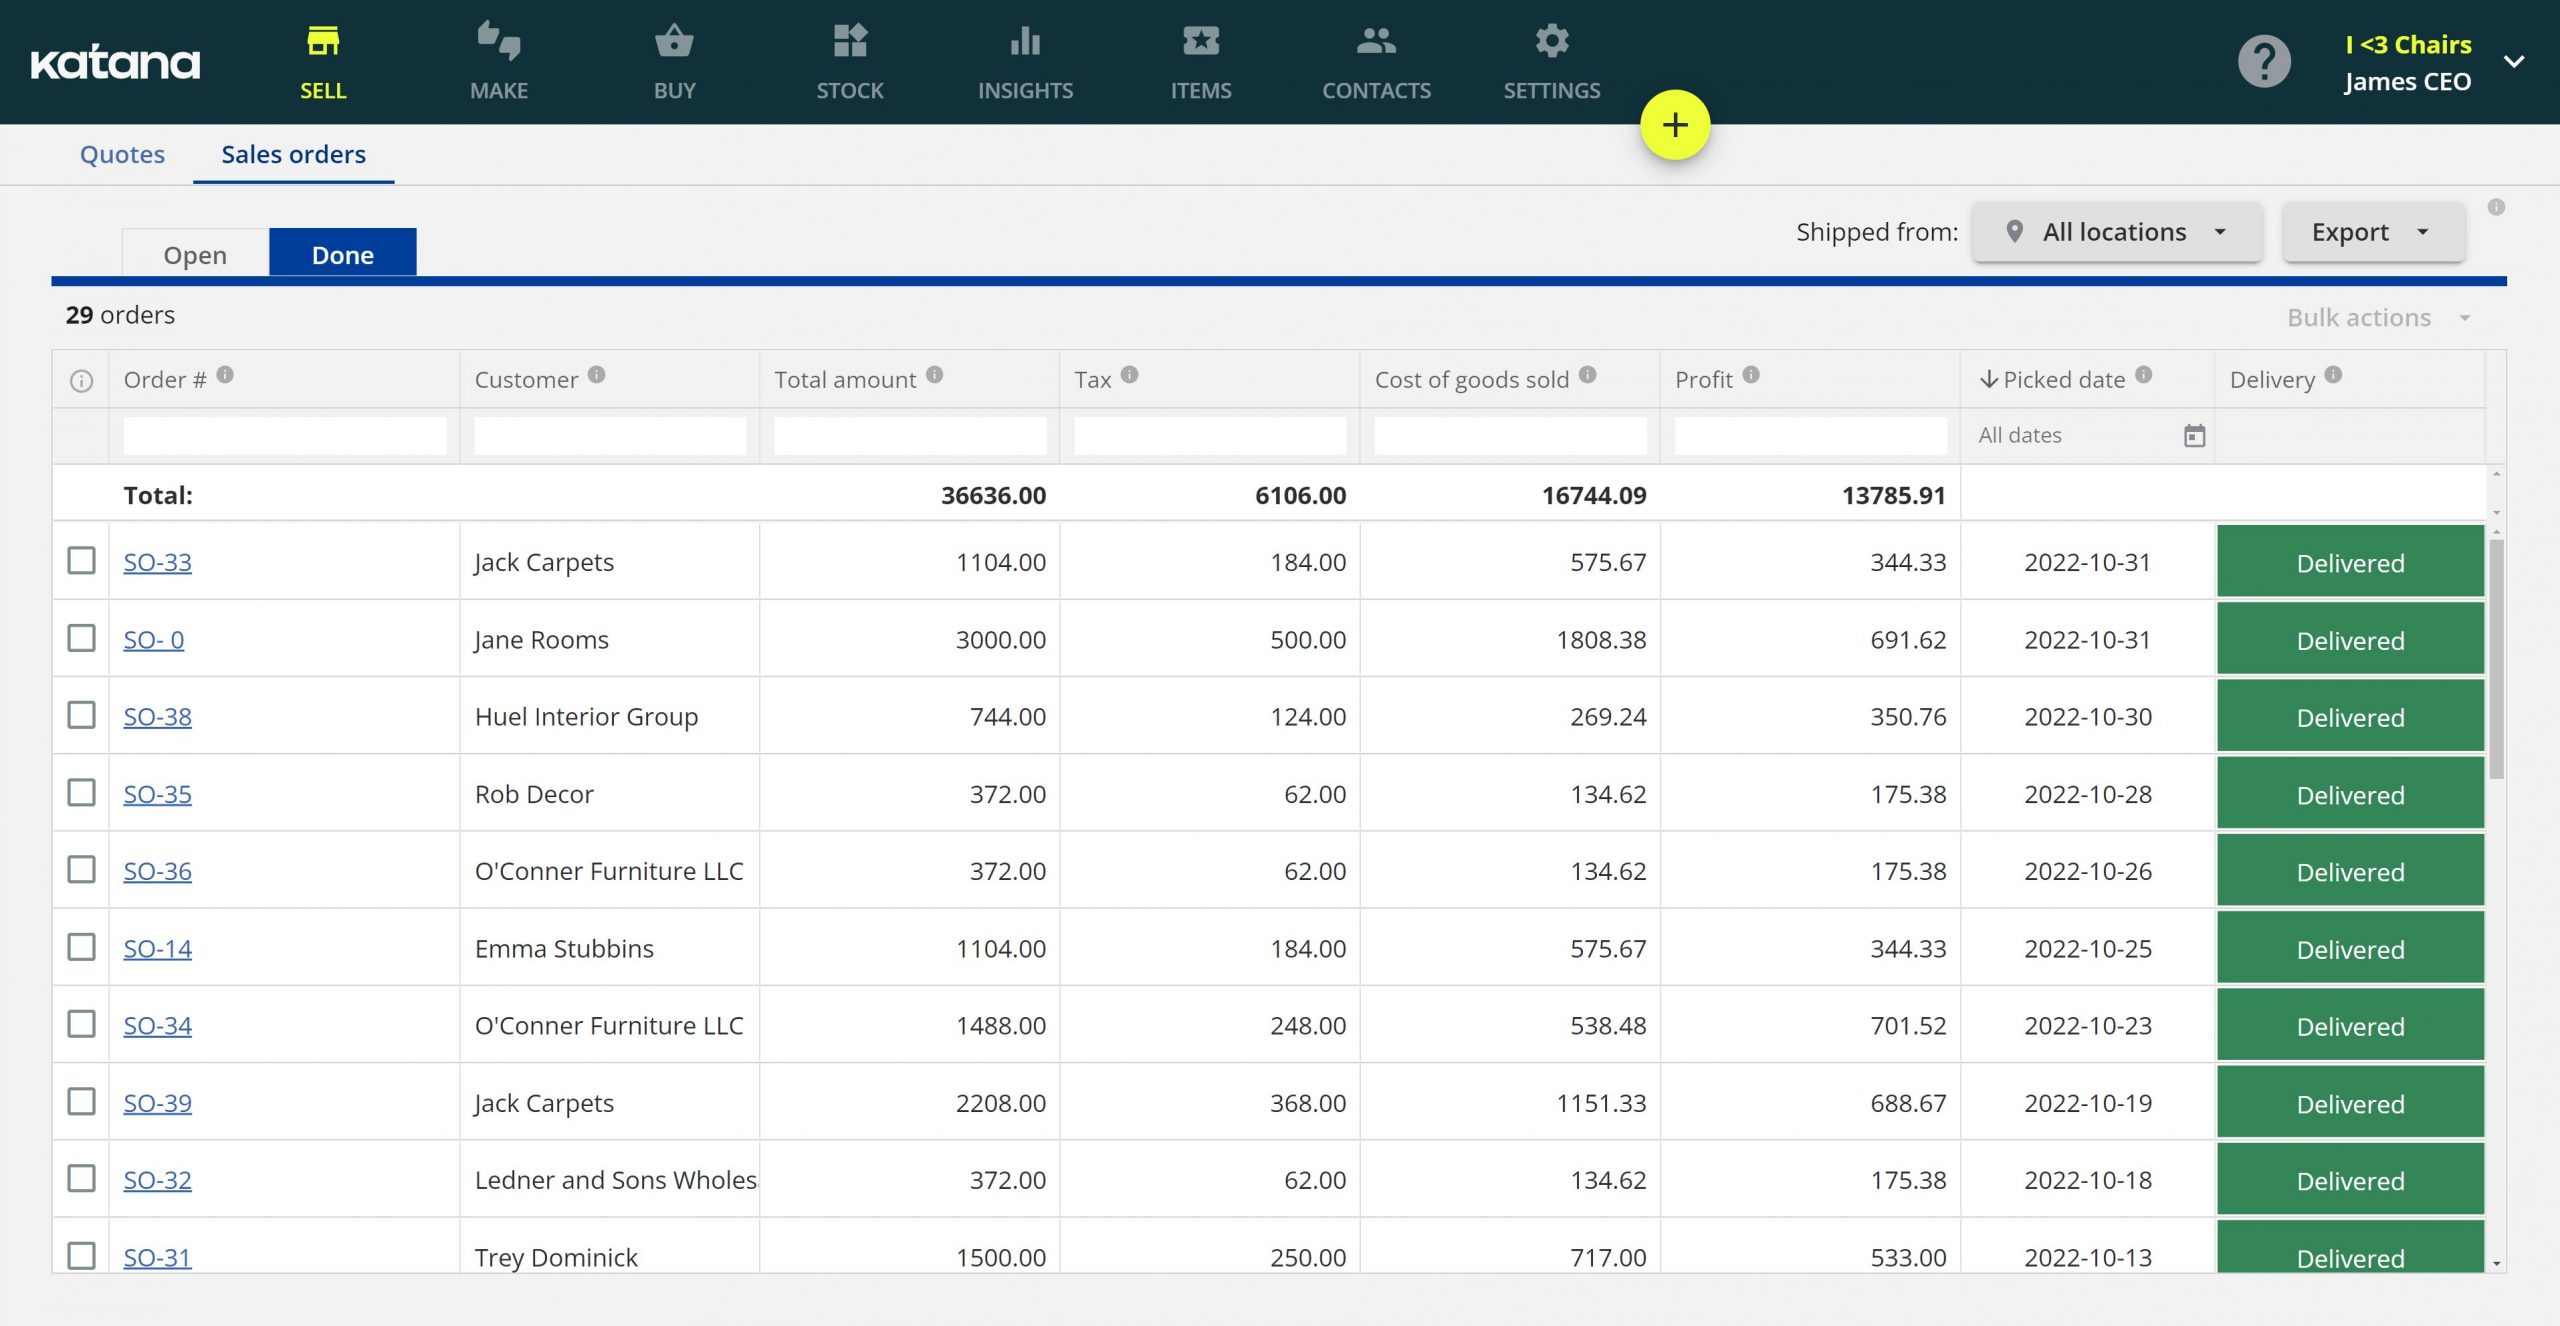 Screenshot of Katana ERP manufacturing software showing completed sales and the associated total manufacturing costs.